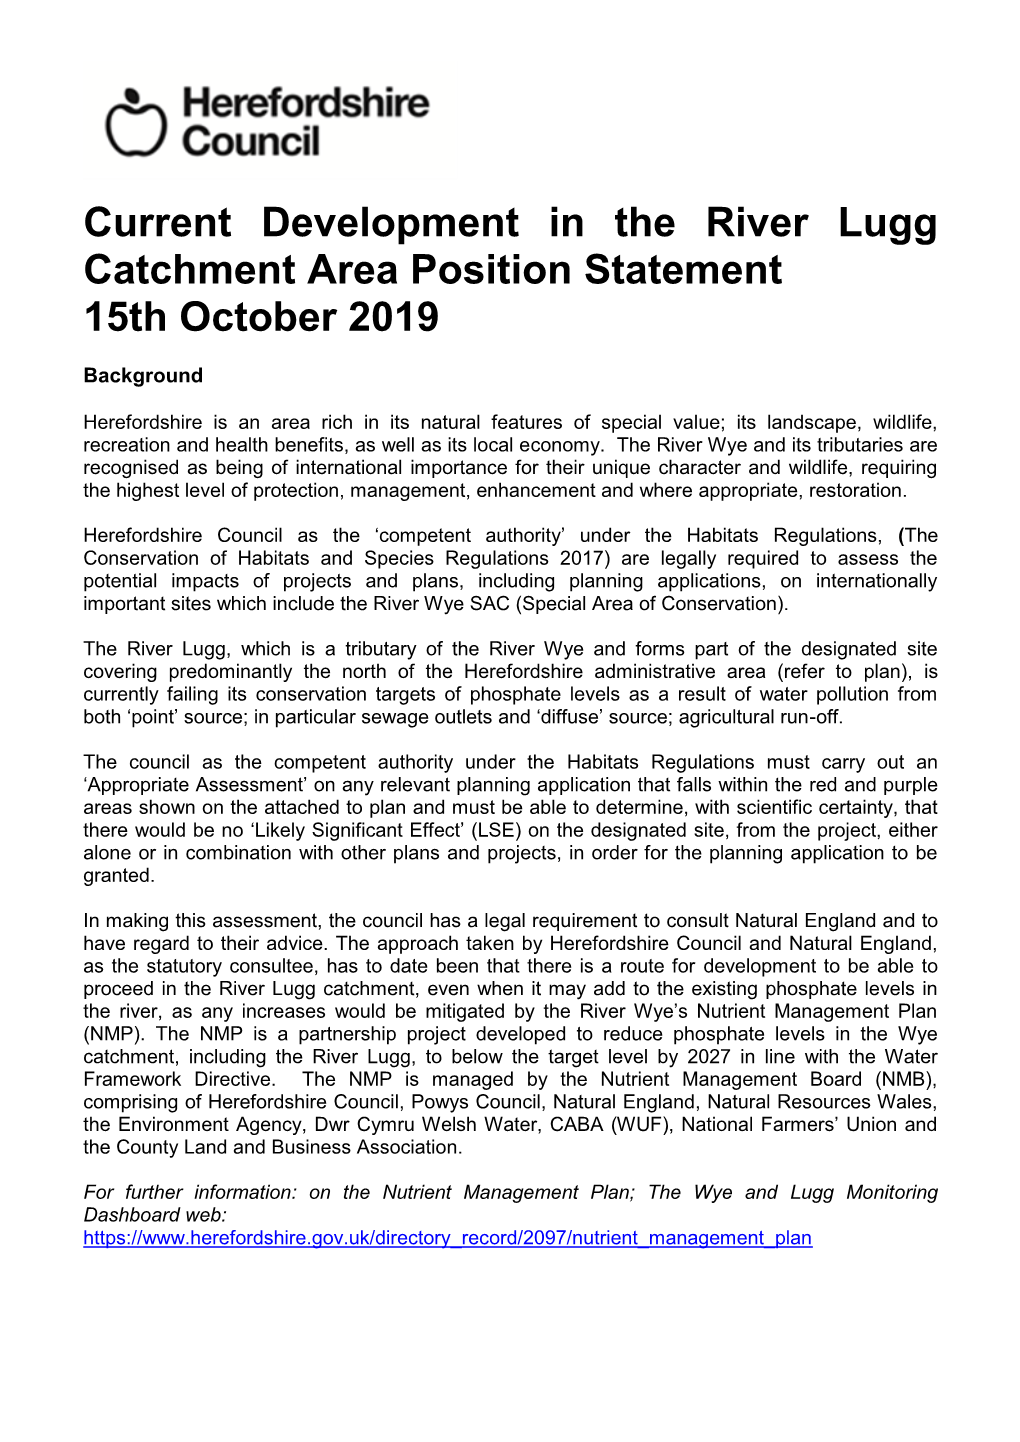 Development in River Lugg Catchment Area Position Statement